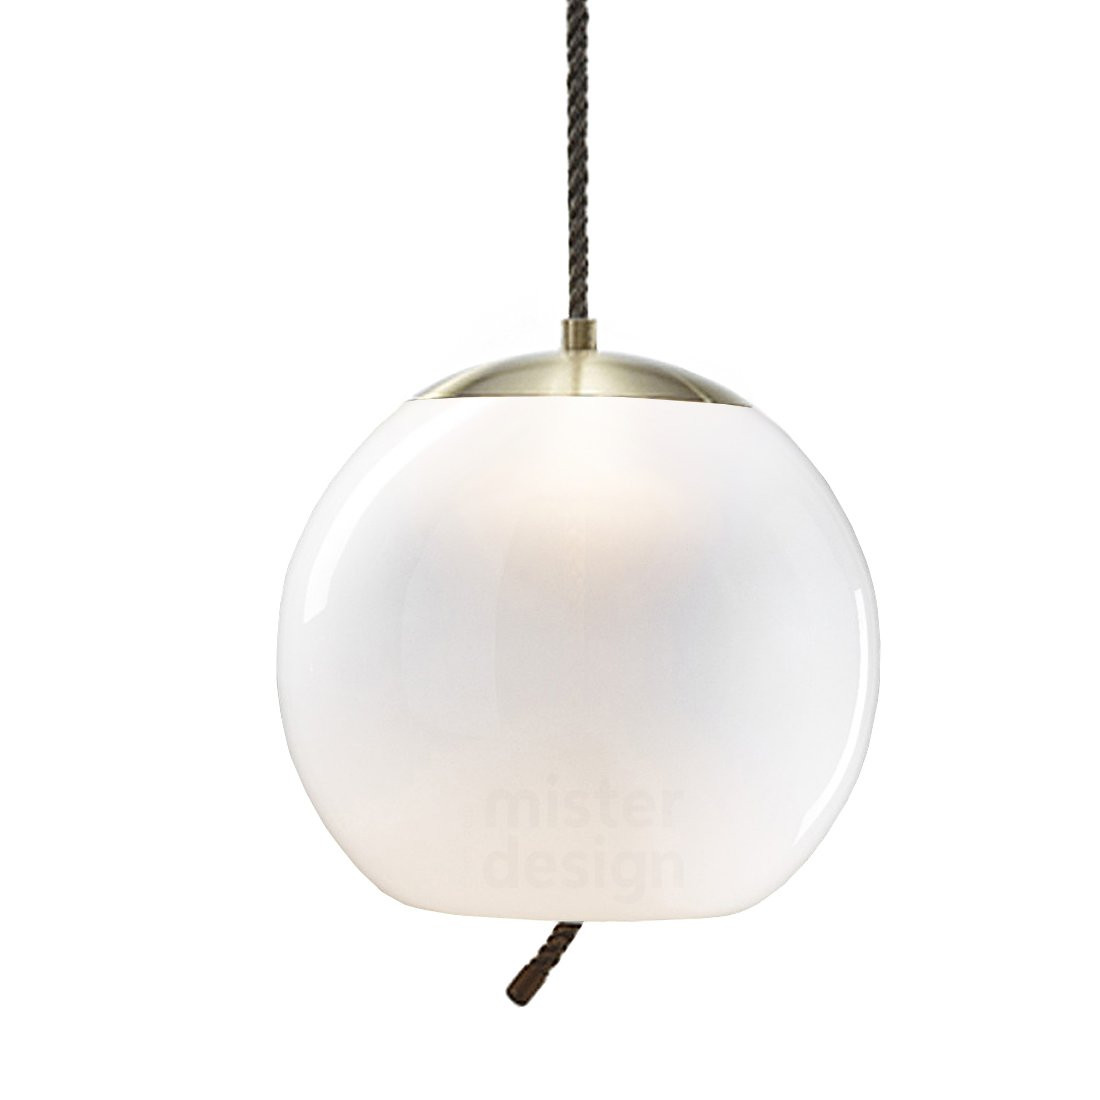 Brokis KNOT Sfera Hanglamp Opaal wit - Messing